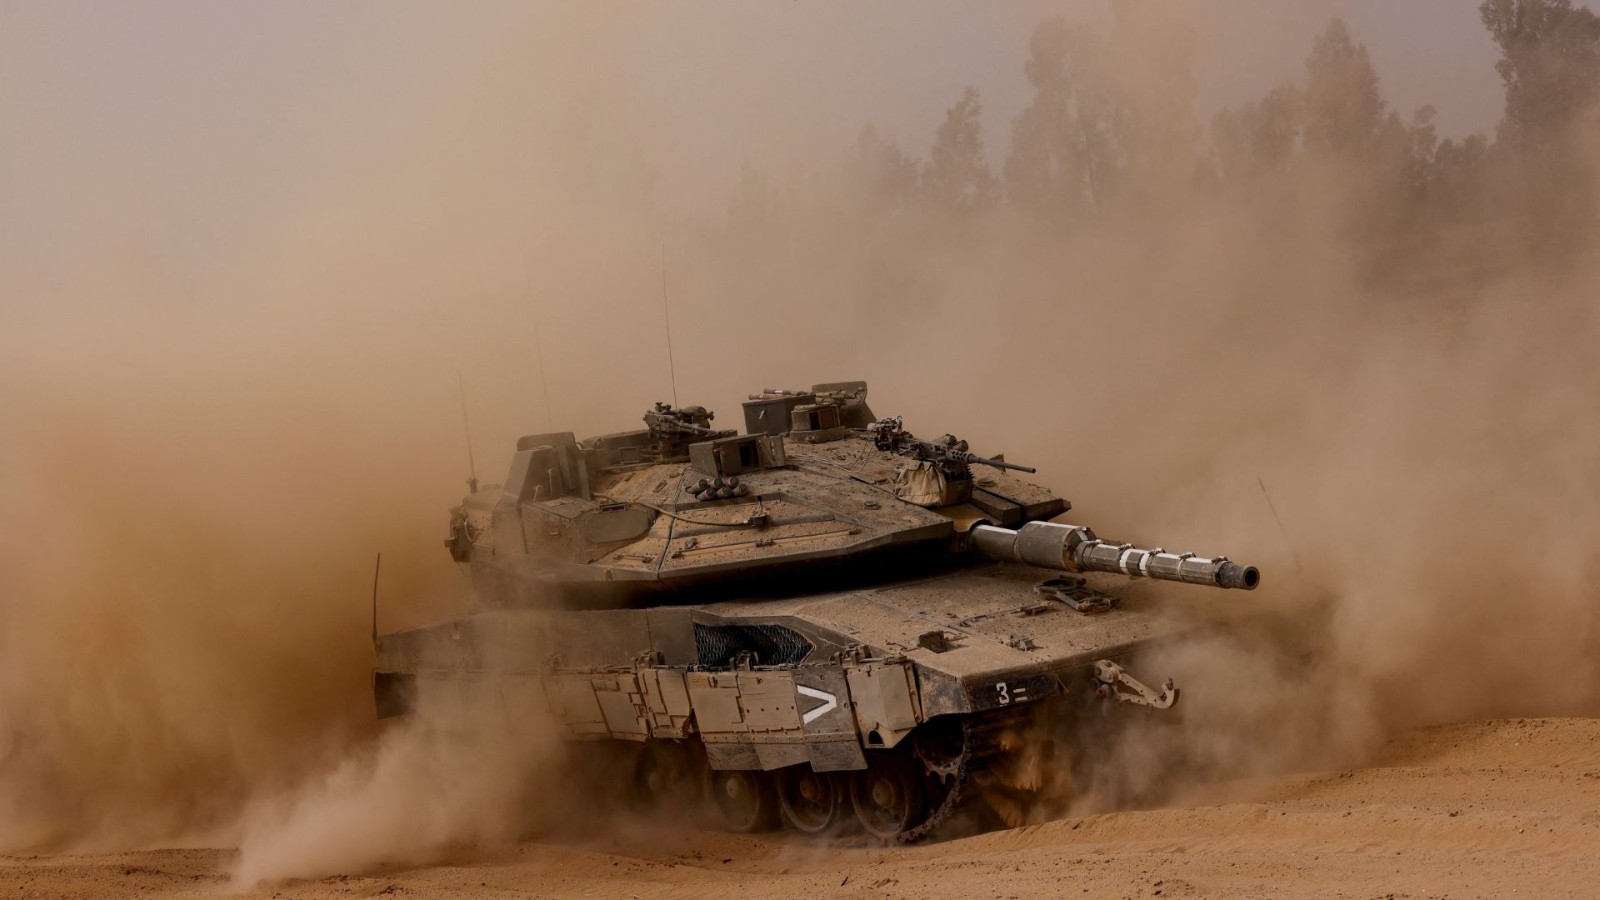 A tank maneuvers near the Israel-Gaza border amid the ongoing conflict between Israel and the Palestinian Islamist group Hamas. /Amir Cohen/Reuters